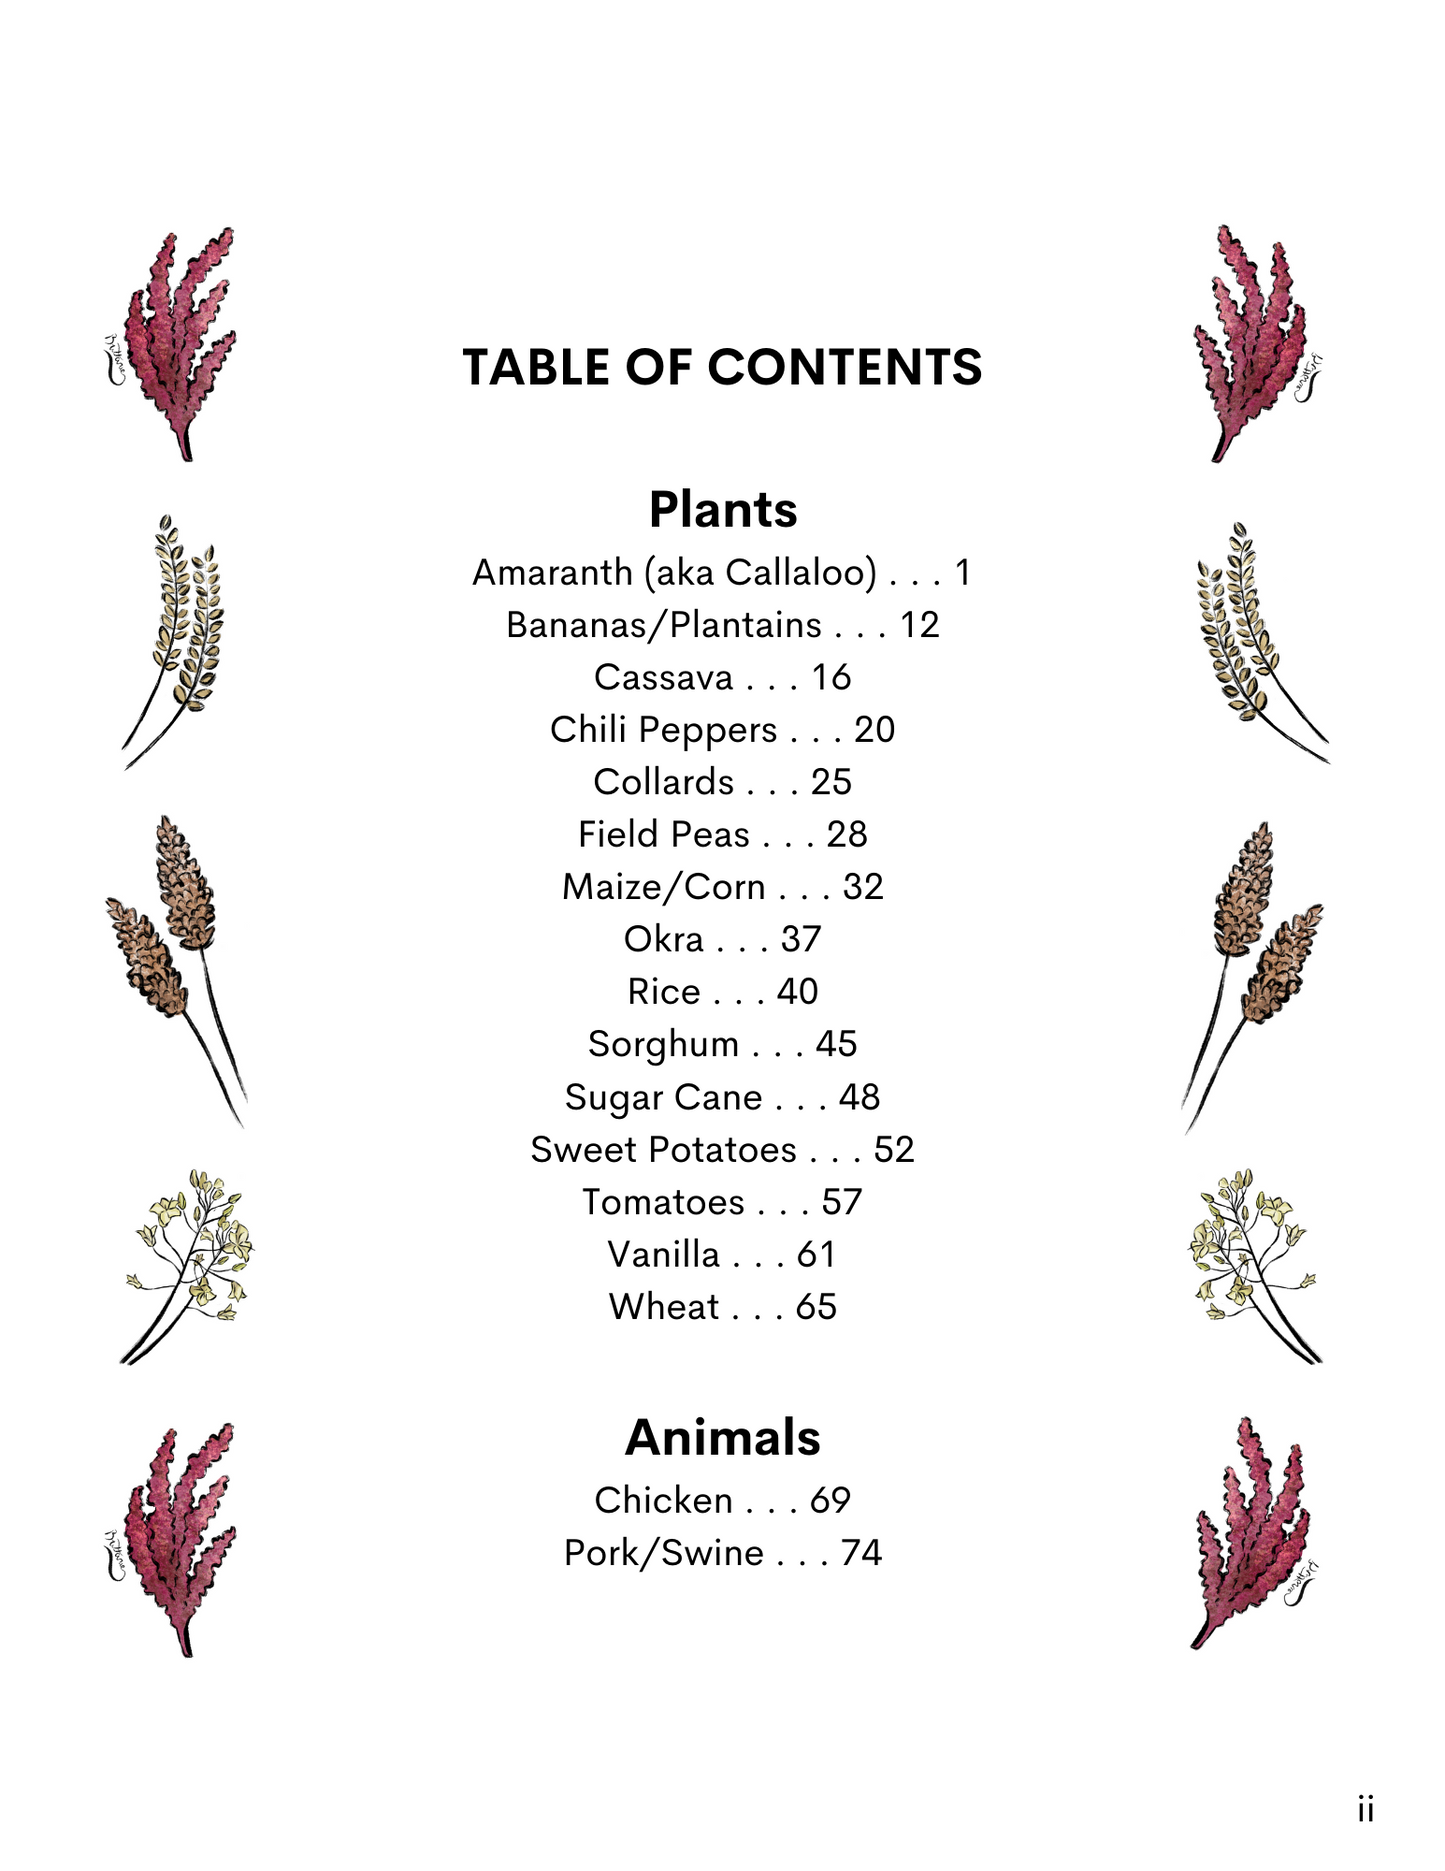 Plants and animals table of contents with a listing of the plants and animals featured in the curriculum.